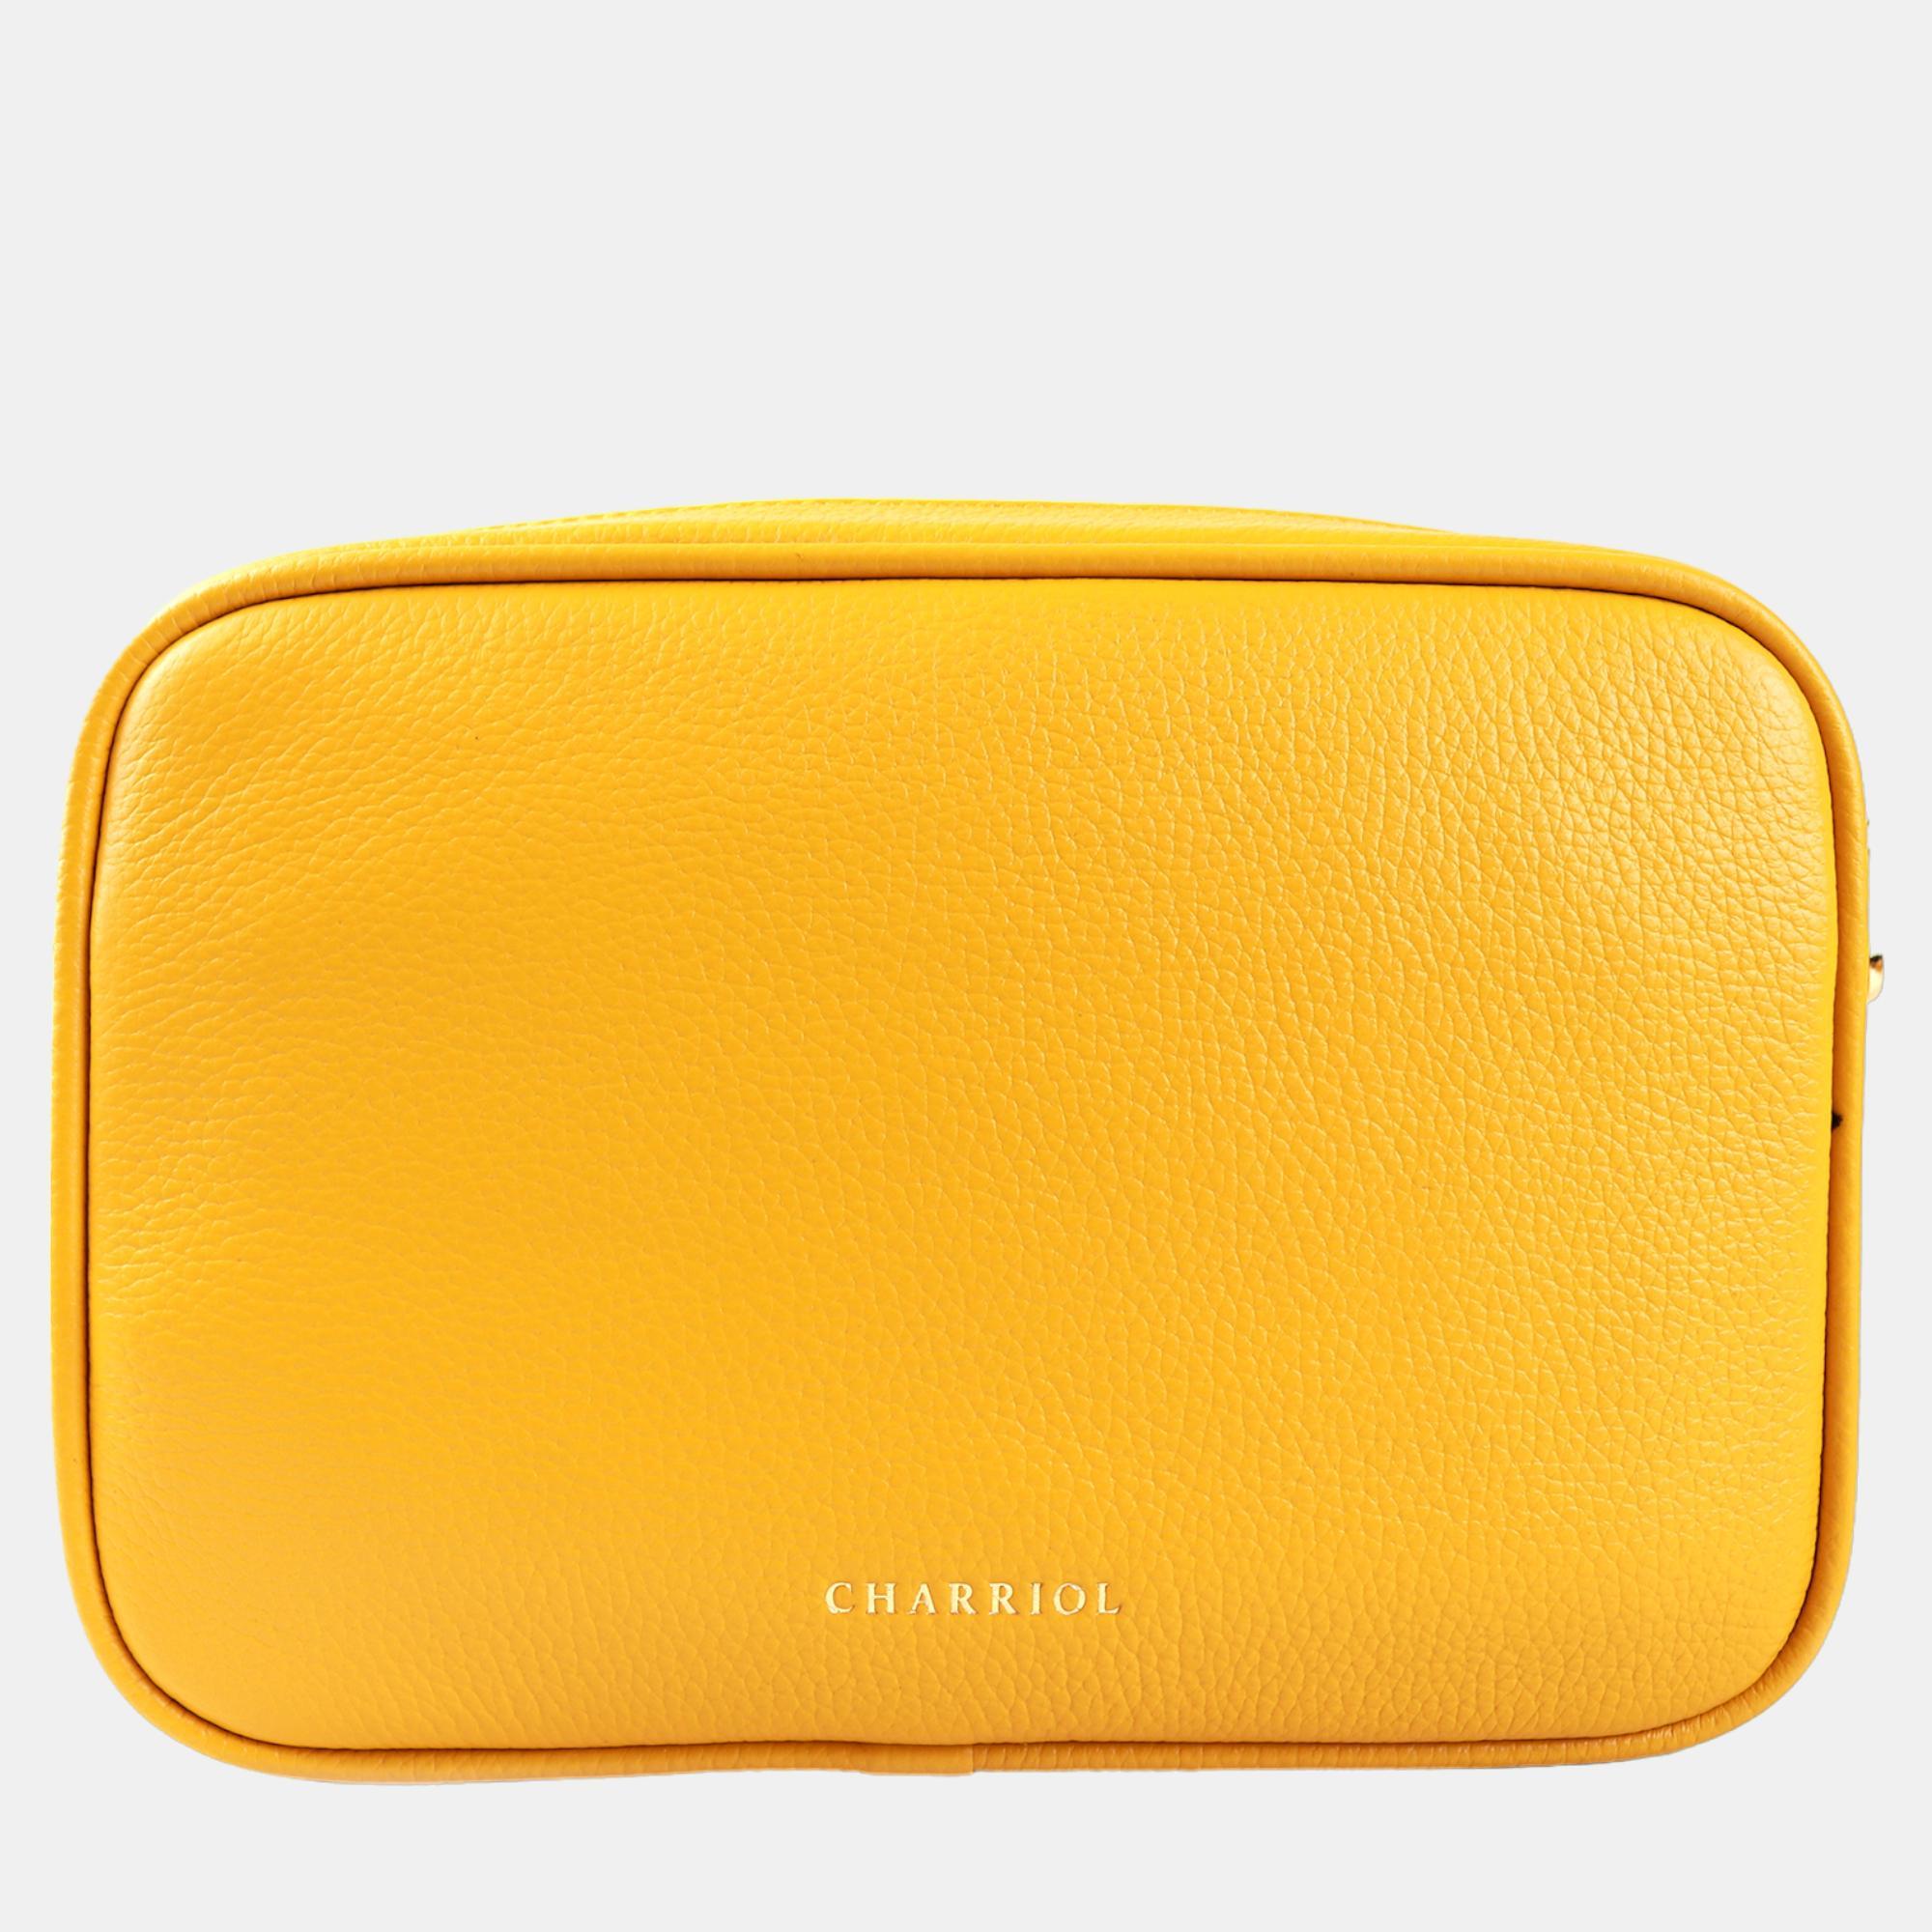 Charriol Yellow Leather Deauville Crossbody